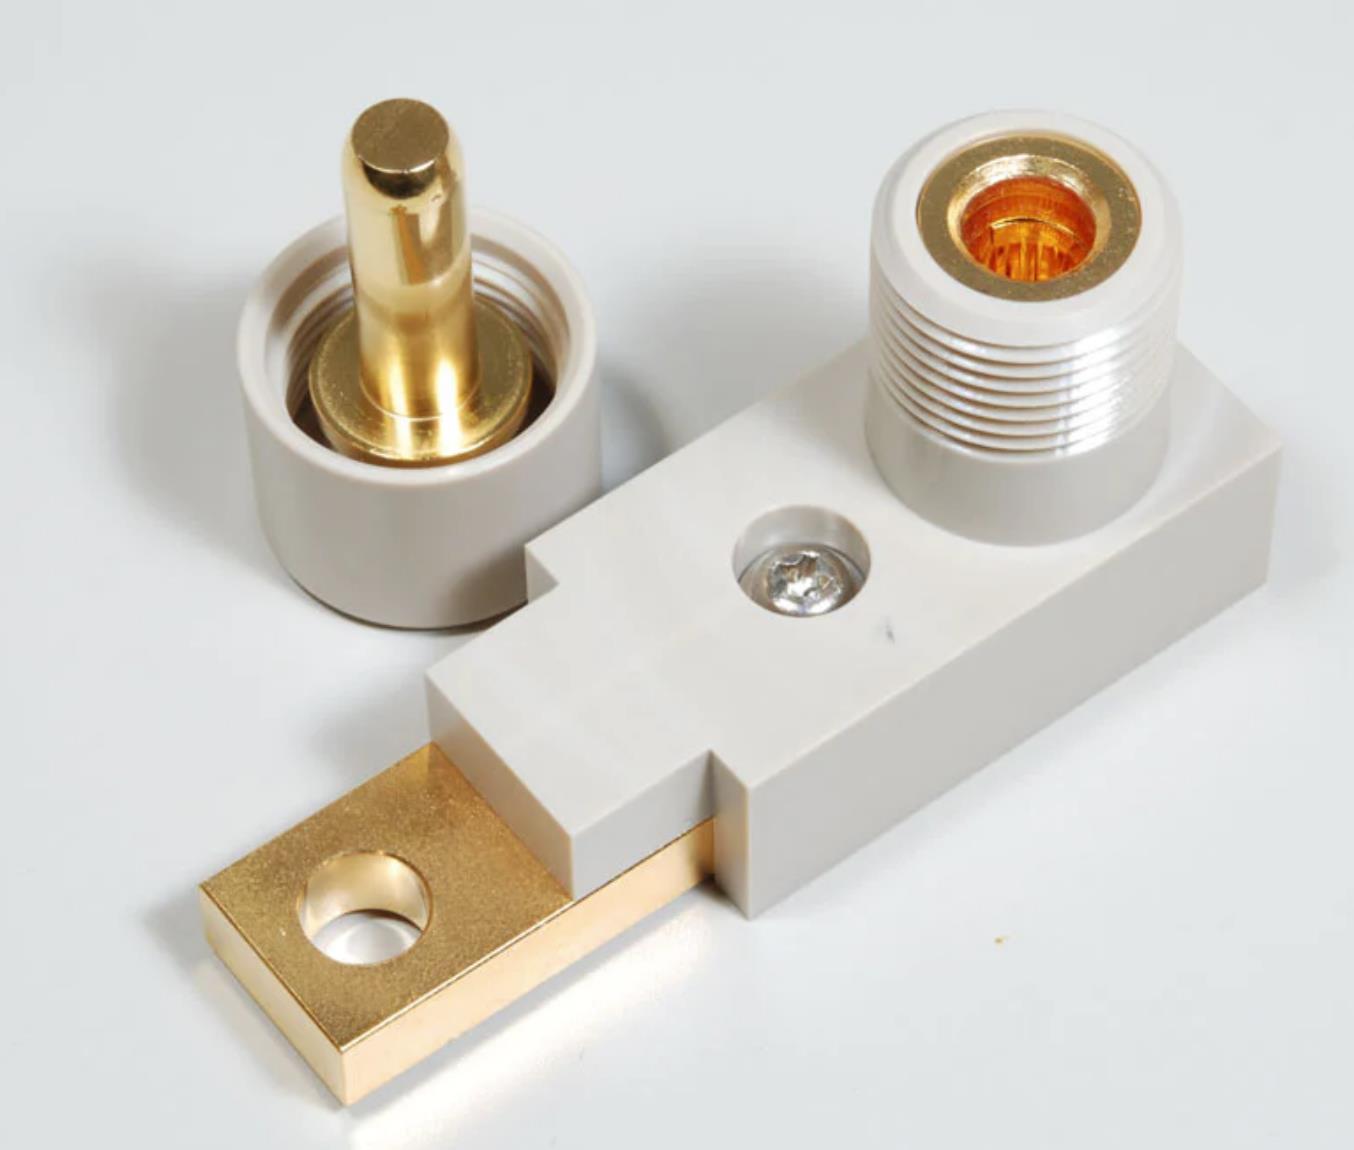 200A high temperature high voltage electrical cabinet peek insulated connector